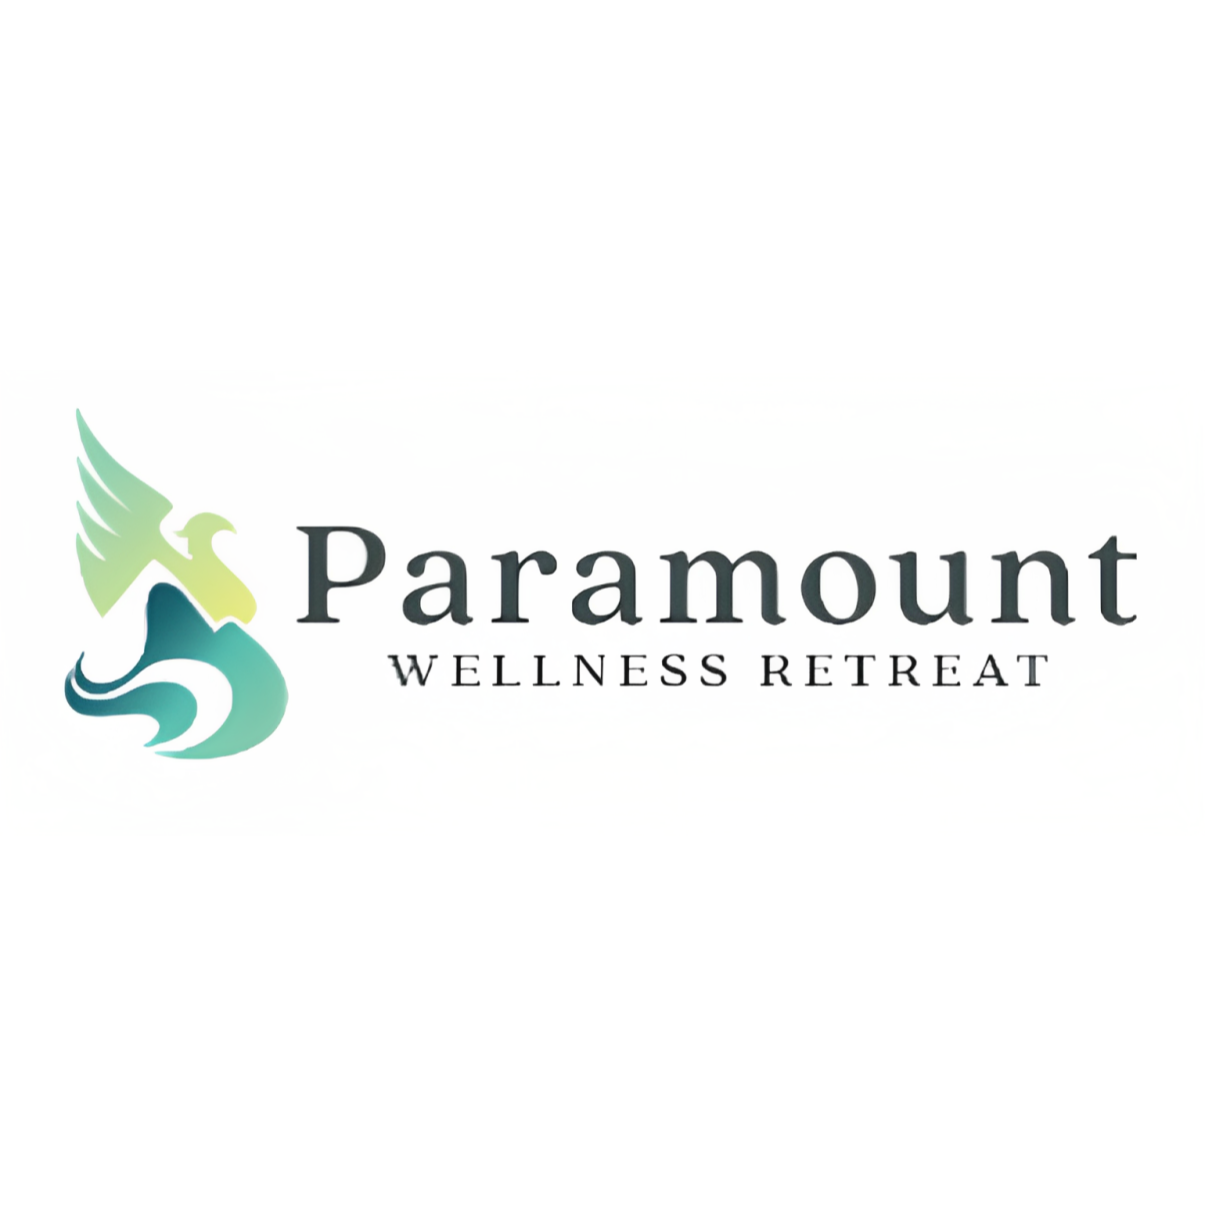 Paramount Wellness Connecticut Recovery Center - Haddam, CT 06438 - (866)535-4962 | ShowMeLocal.com